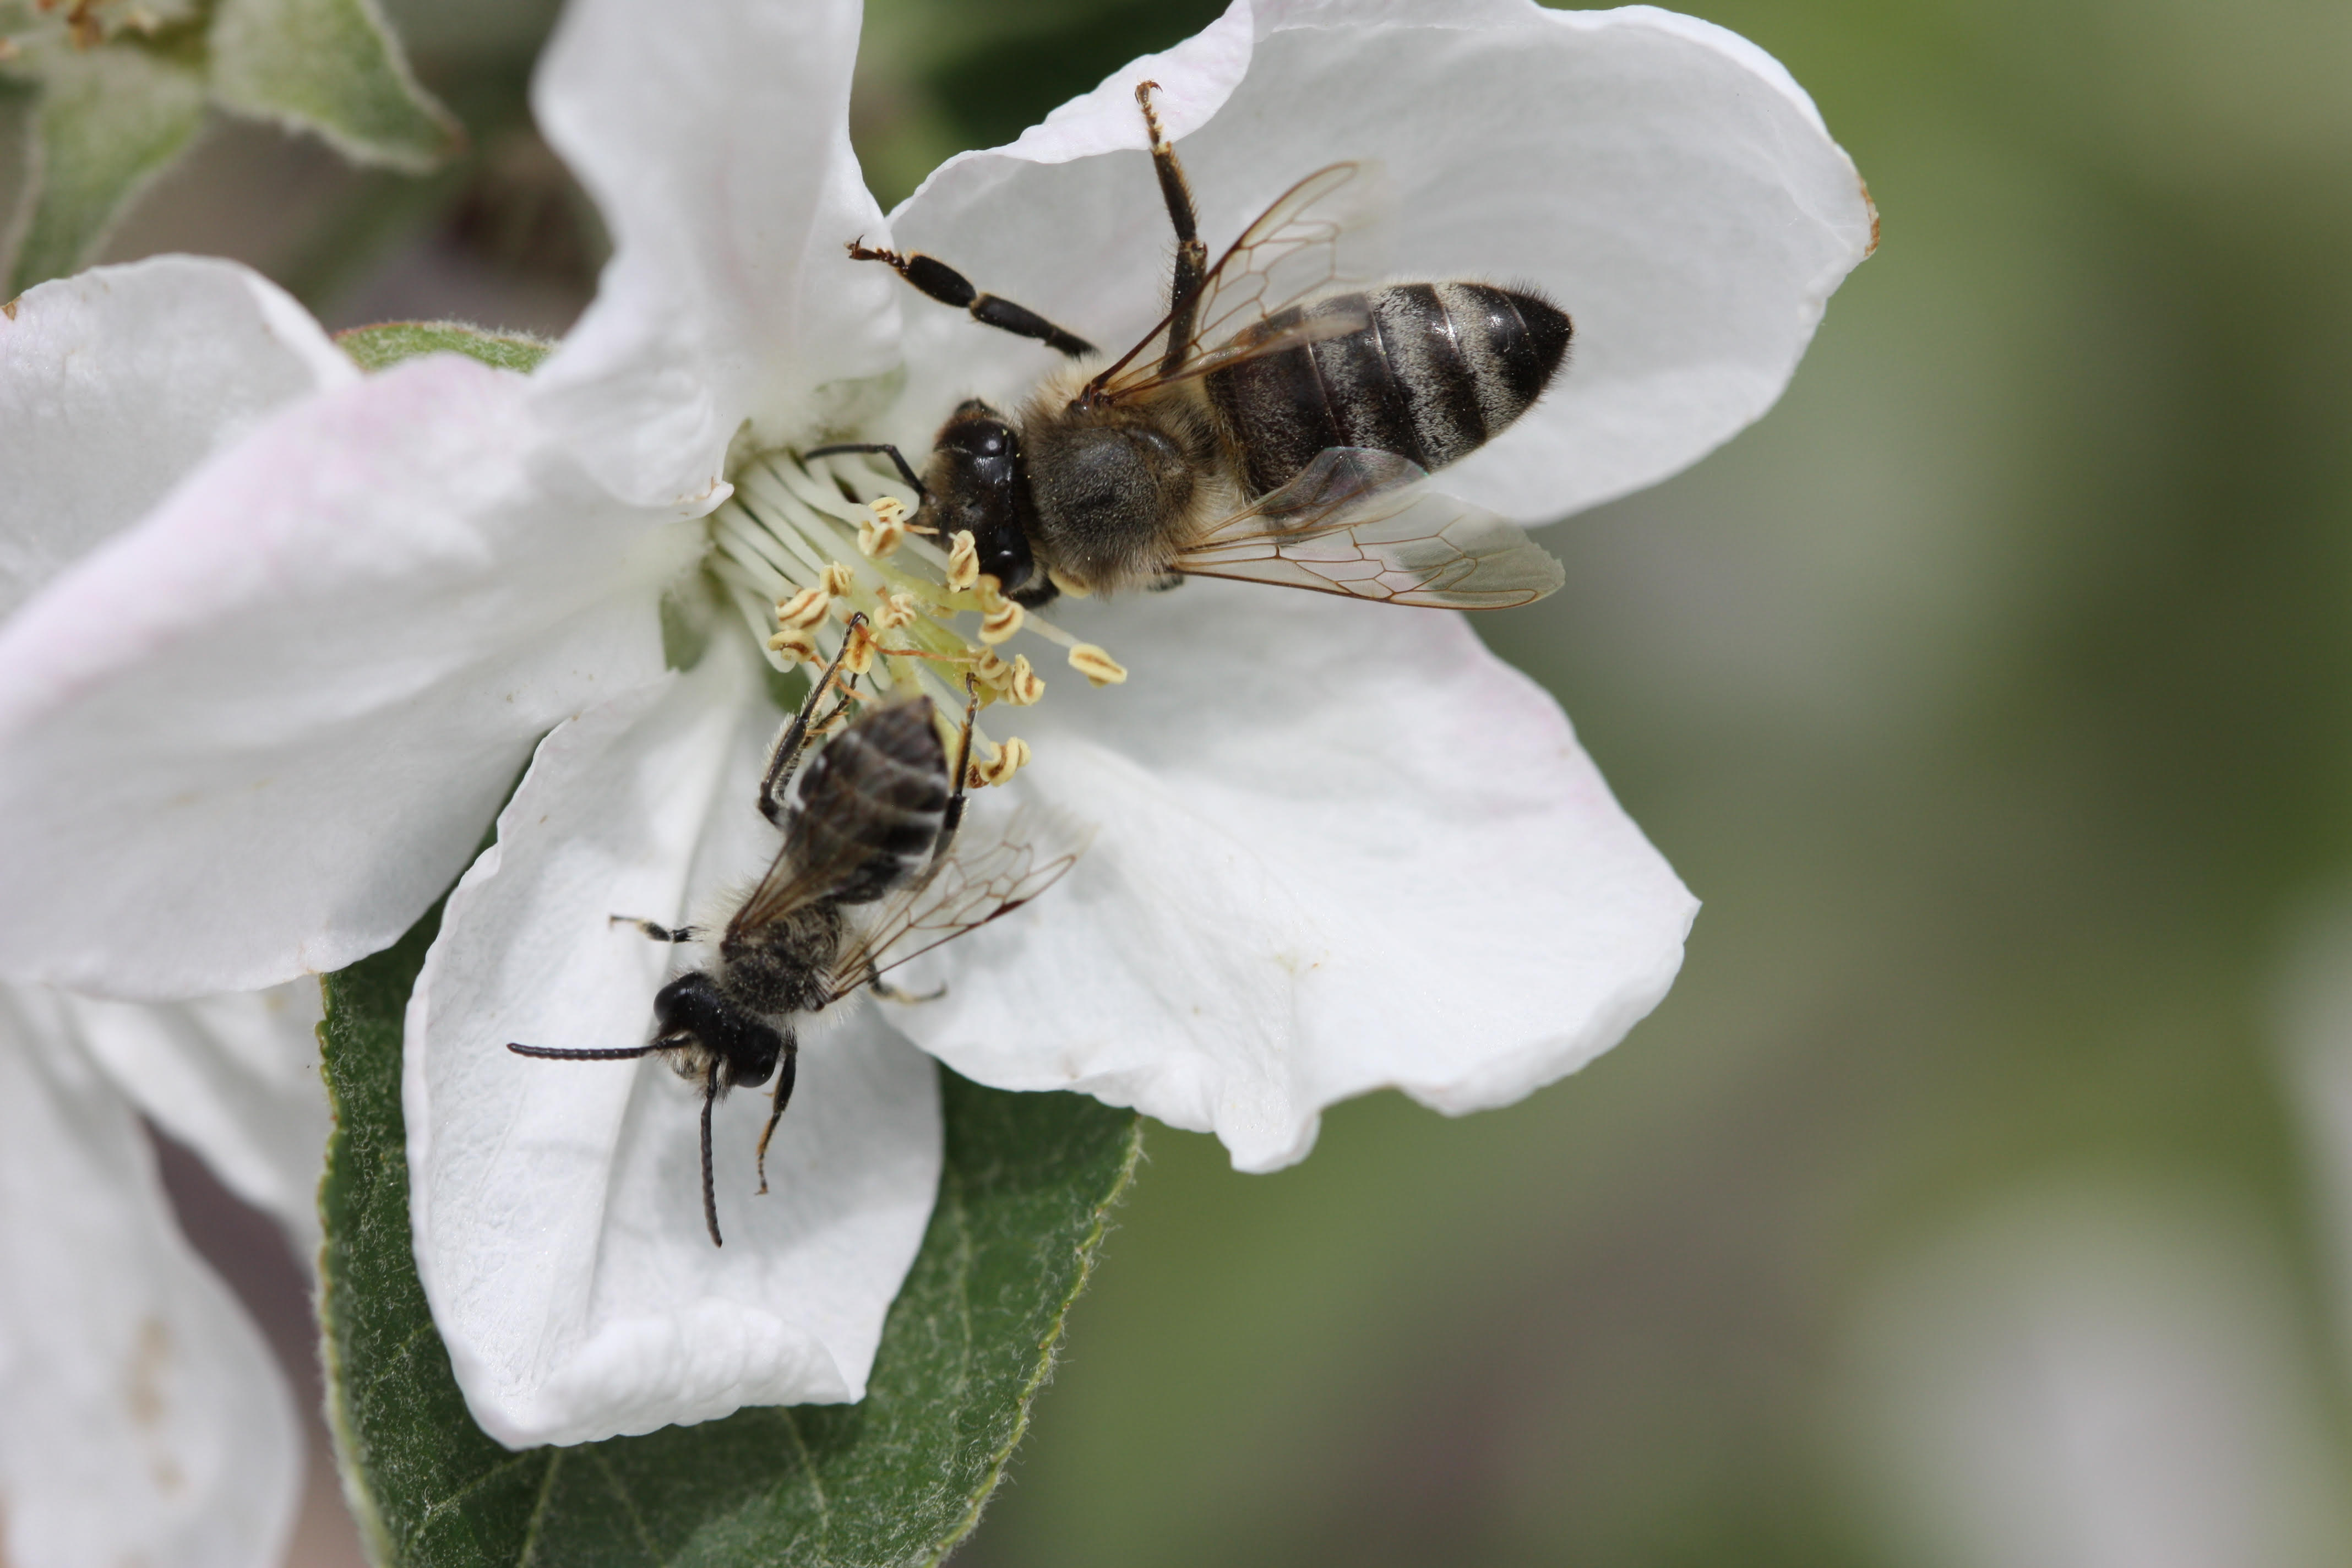 A honey bee worker and a male mining bee share an apple blossom. Photo: Courtesy Martin Husemann. Click image to download hi-res version.